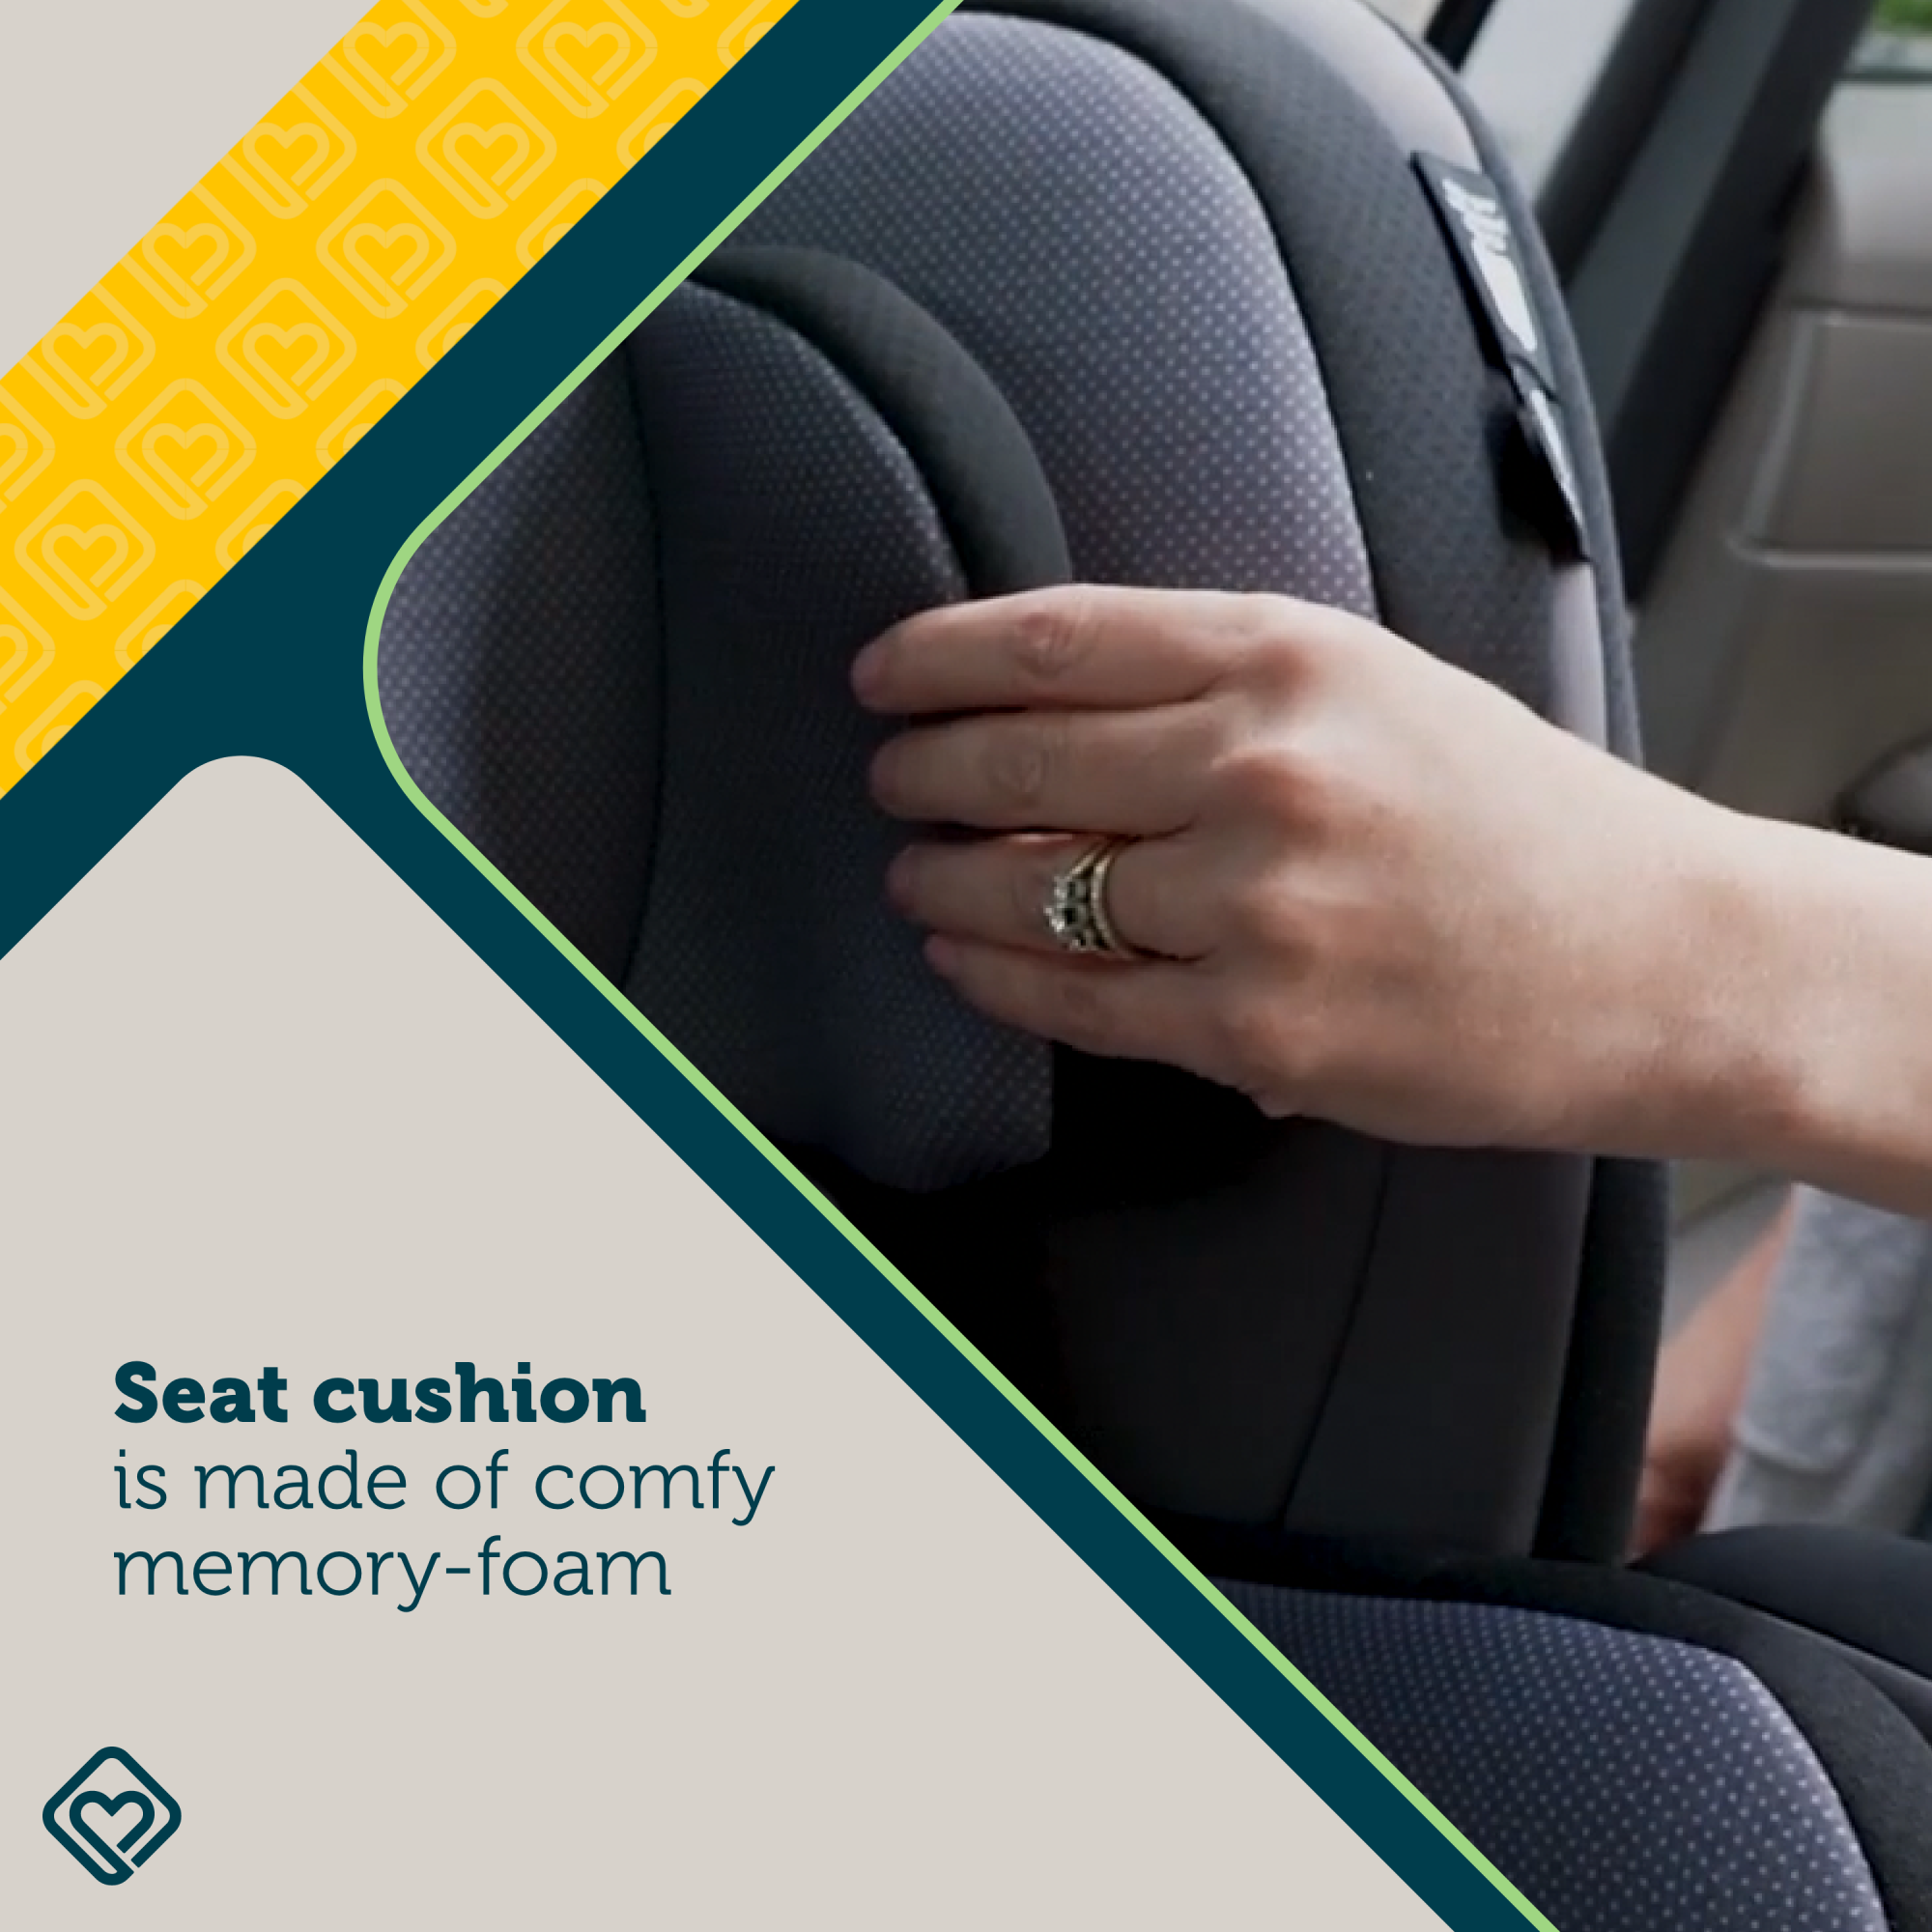 EverSlim 4-Mode All-in-One Convertible Car Seat - seat cushion is made of comfy memory-foam